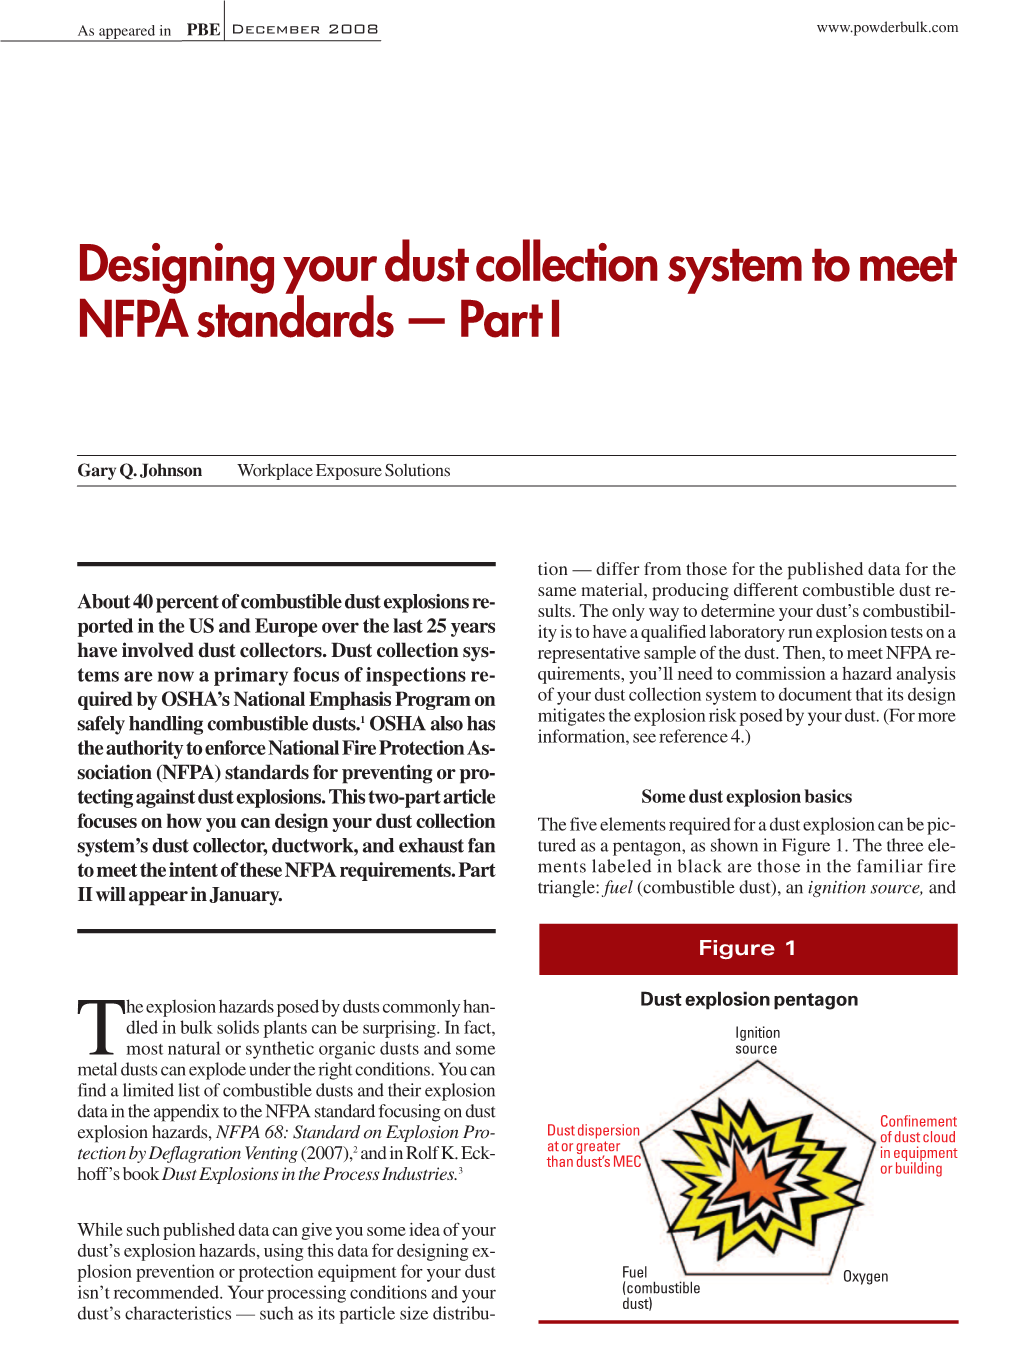 Designing Your Dust Collection System to Meet NFPA Standards — Part I